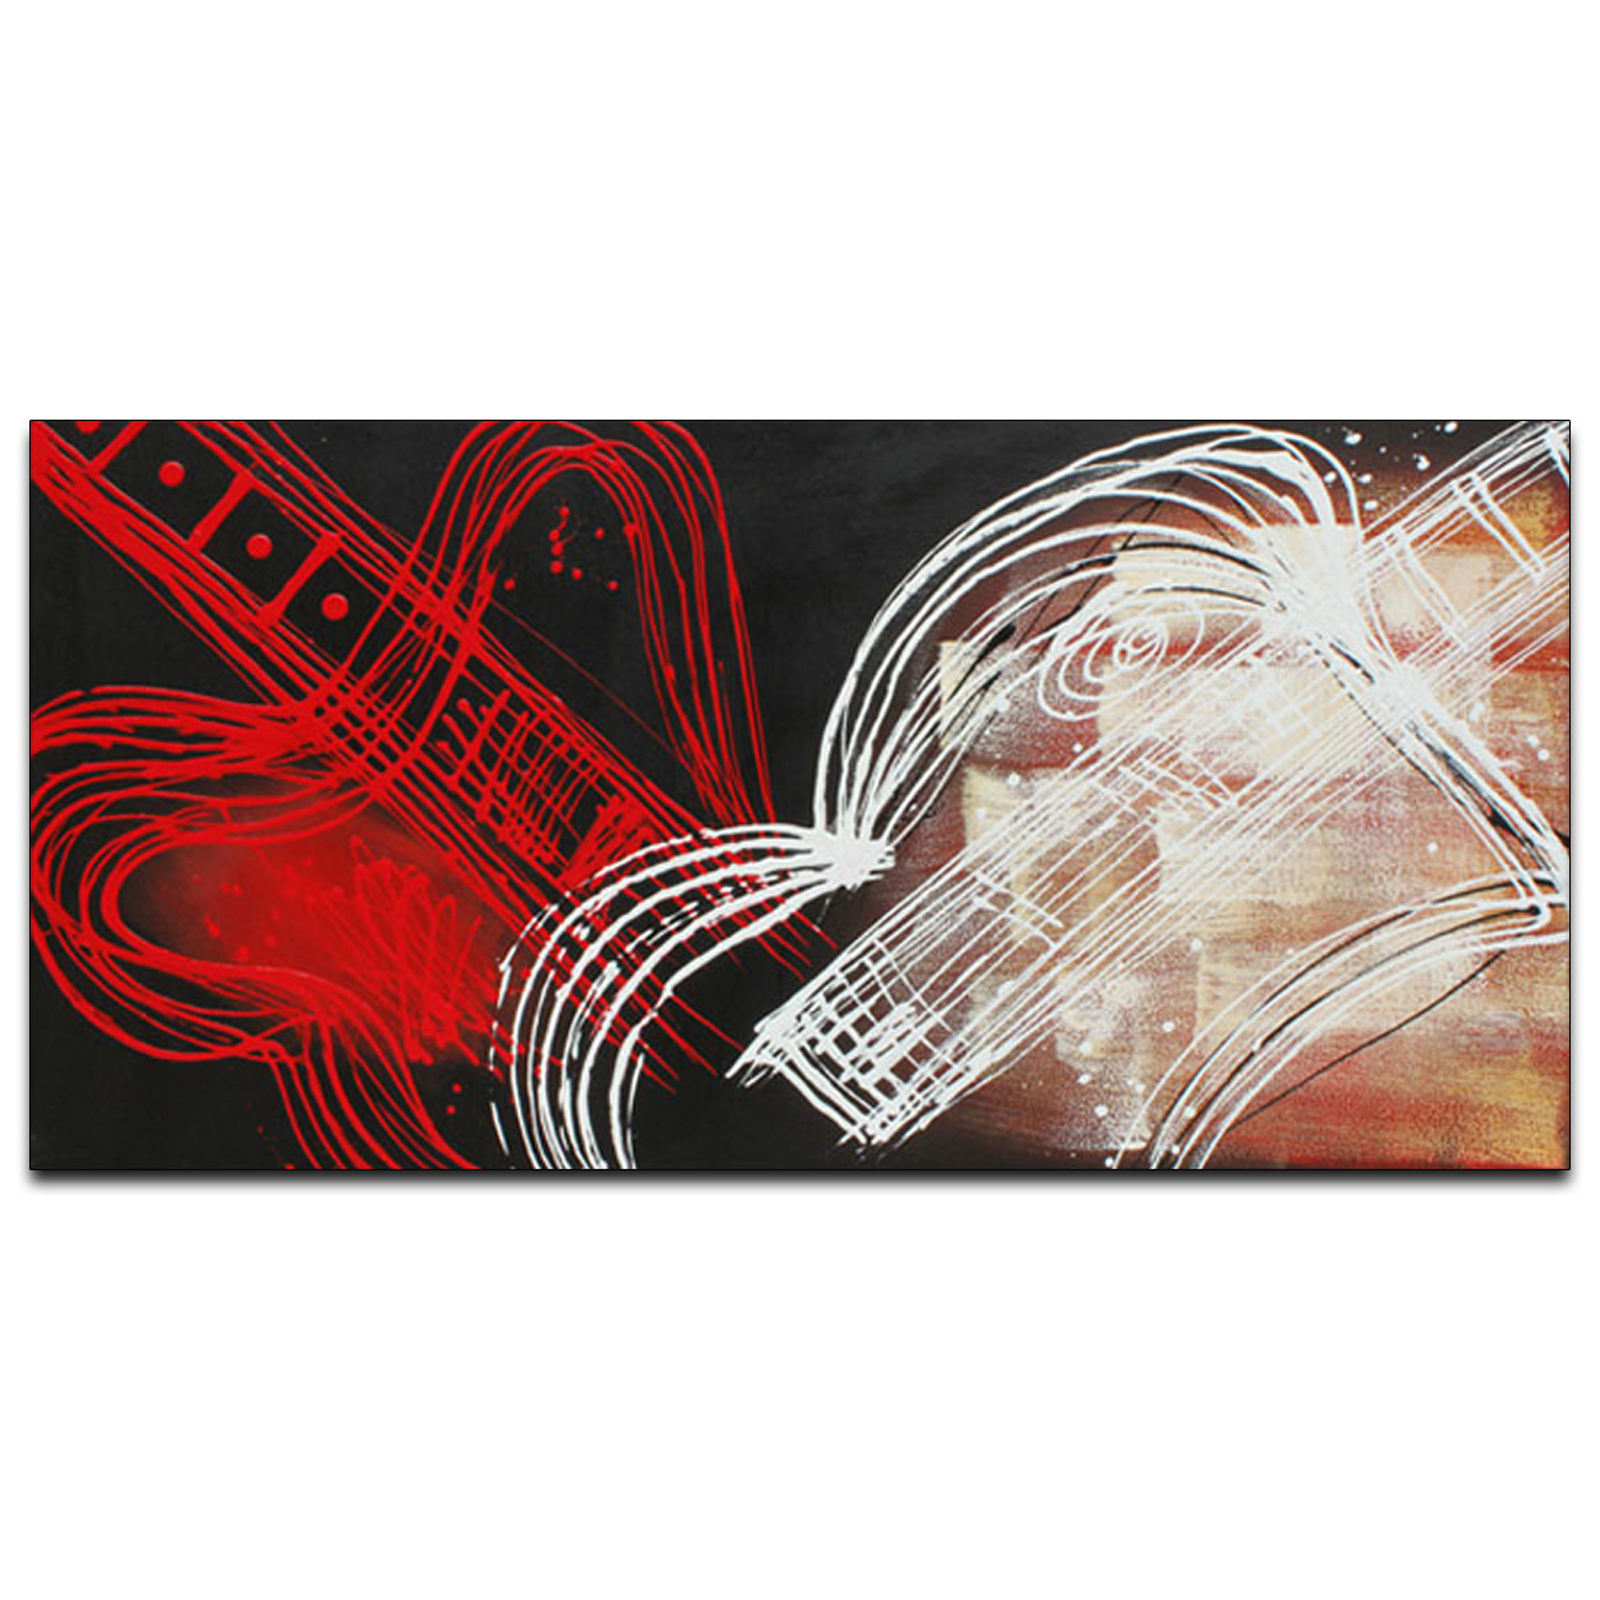 Music modern painting - 32 x 26 in  - Textured Hand-Painted Fine Art - Stretched on wooden bars - Wall kit included